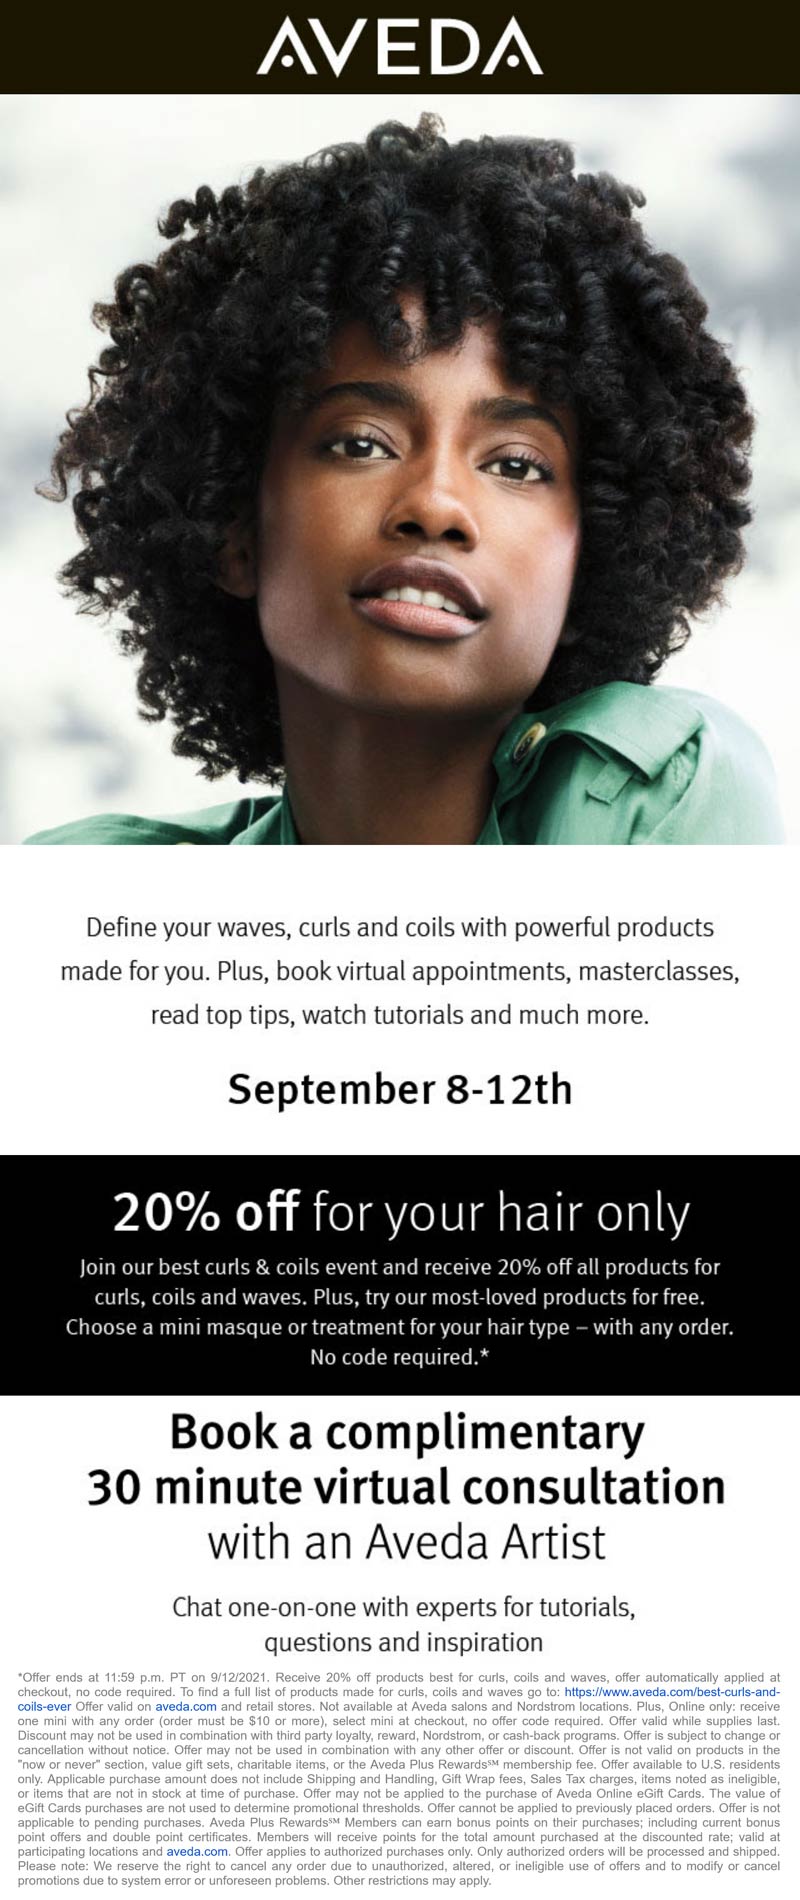 Aveda stores Coupon  20% off products best for curls, coils and waves at Aveda, ditto online #aveda 